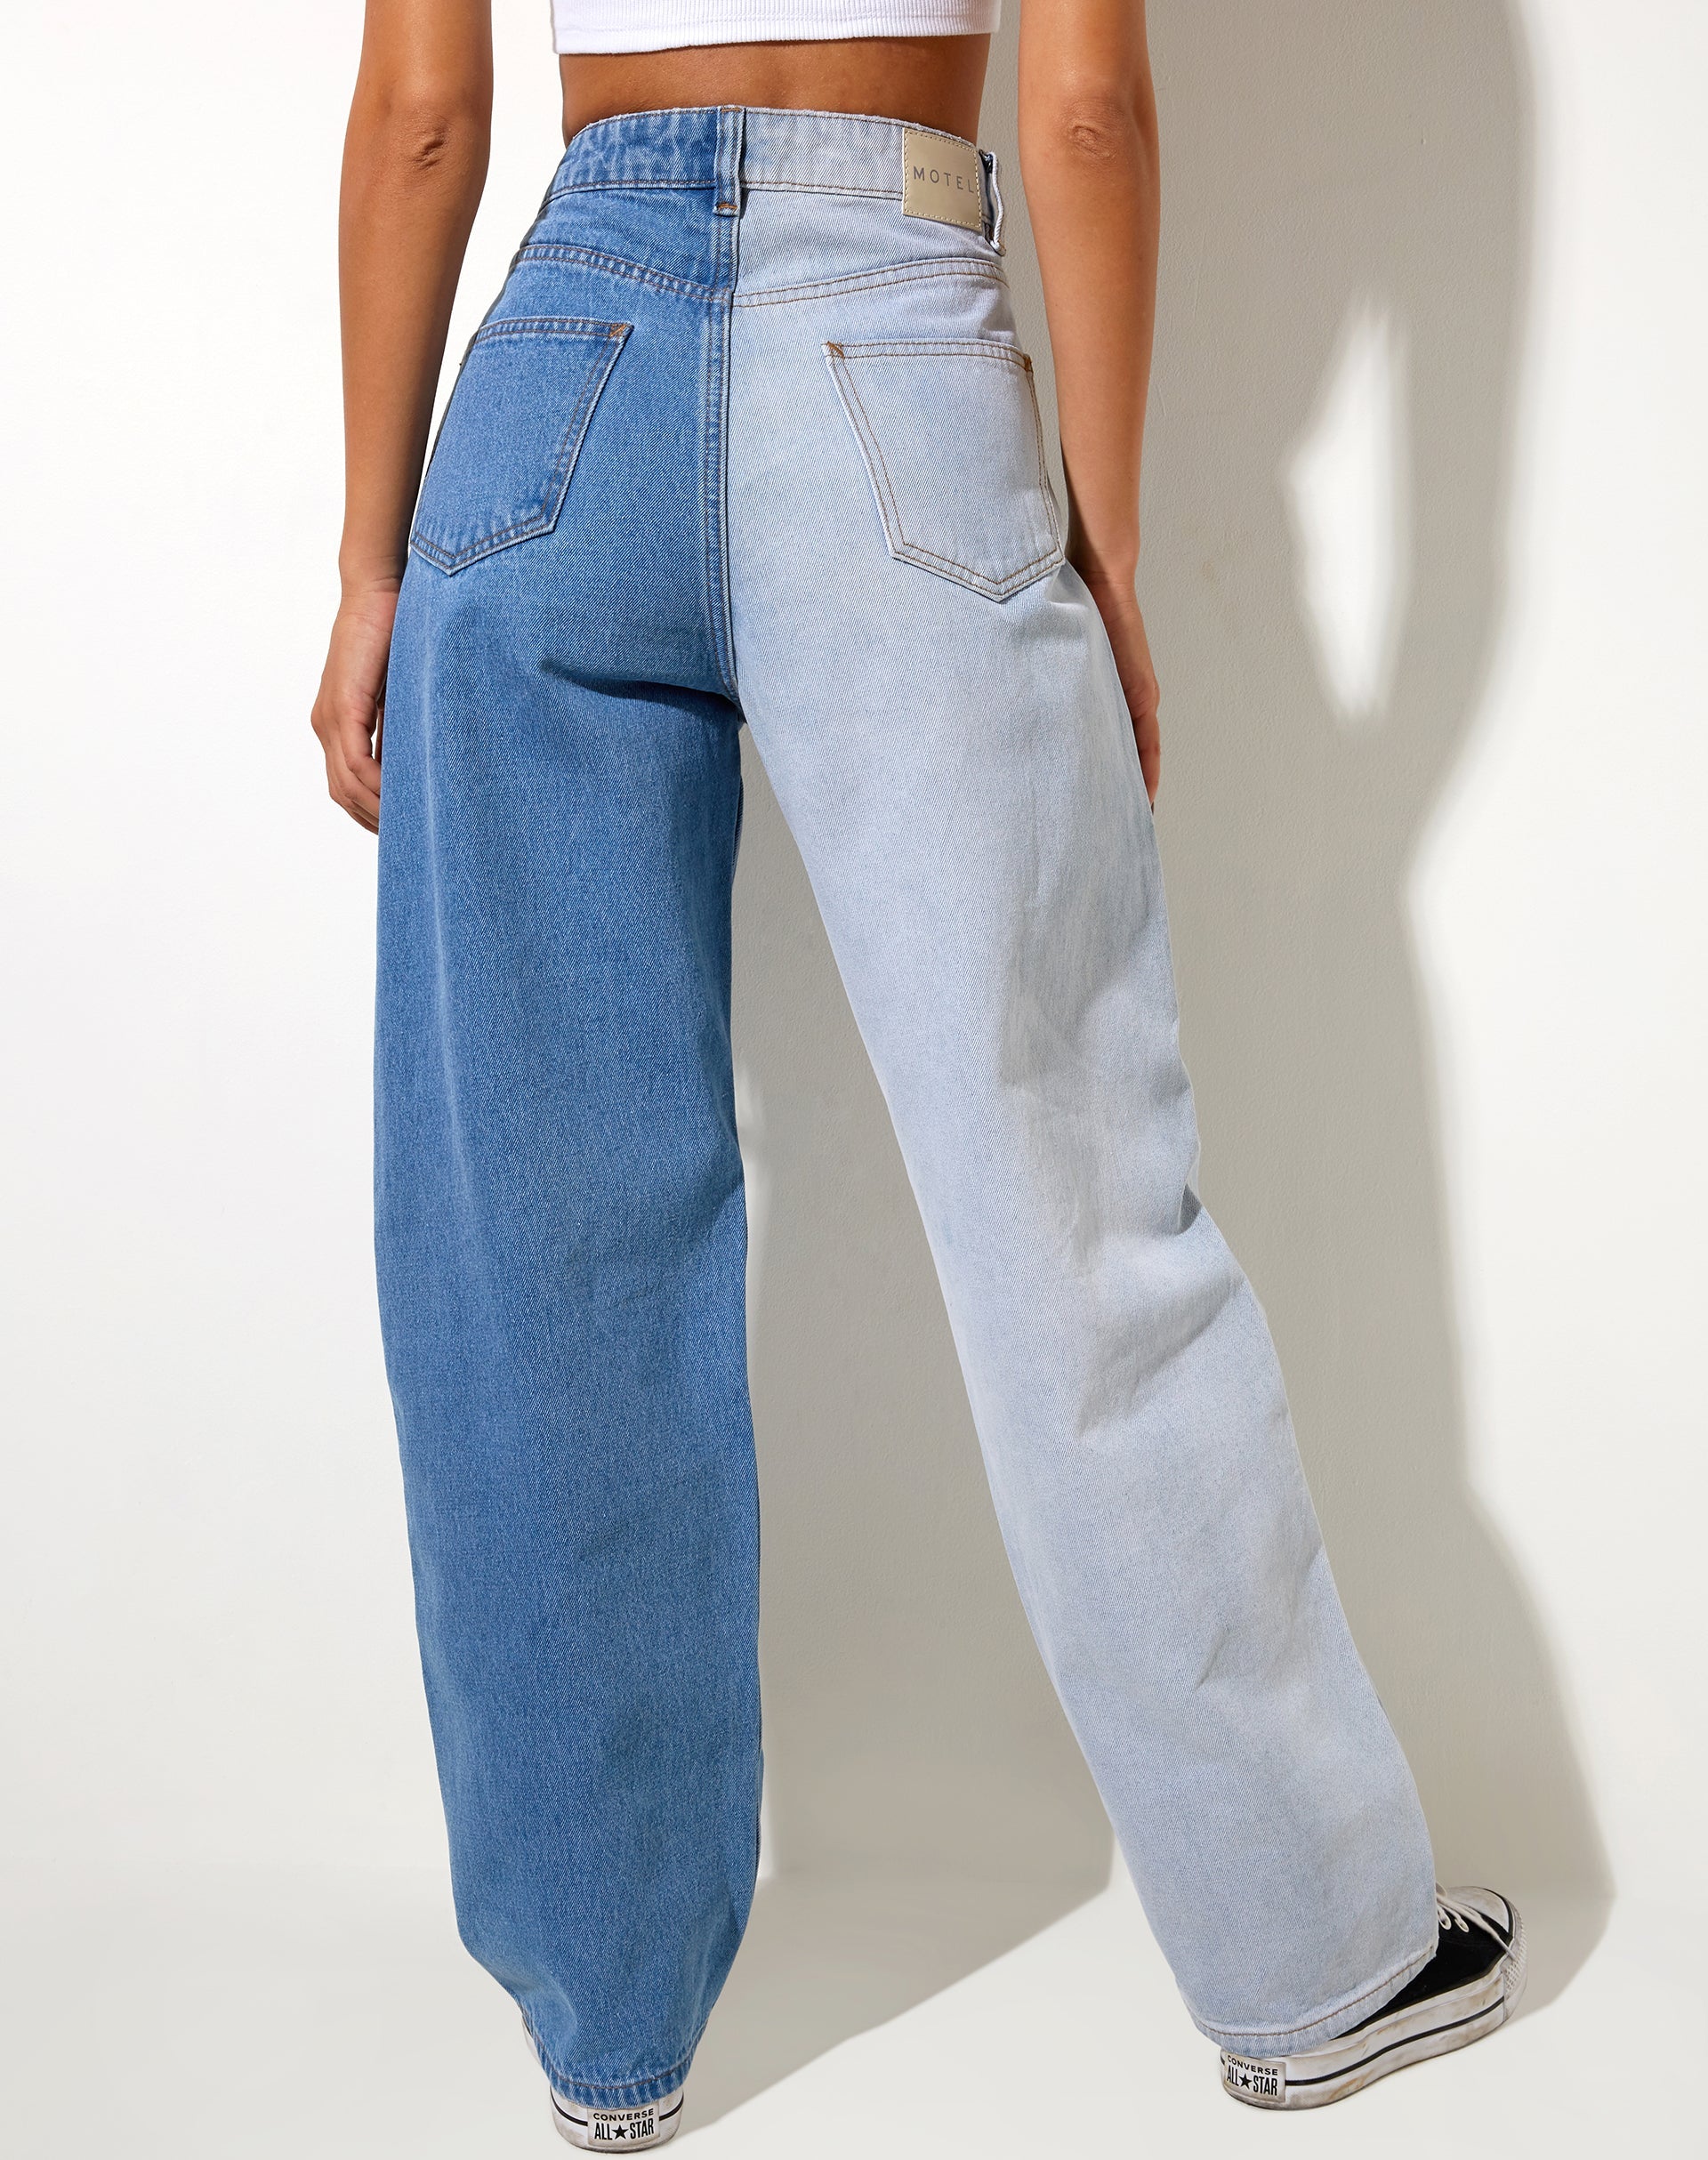 Image of Half and Half Parallel Jean in Light Wash and Bleach Denim